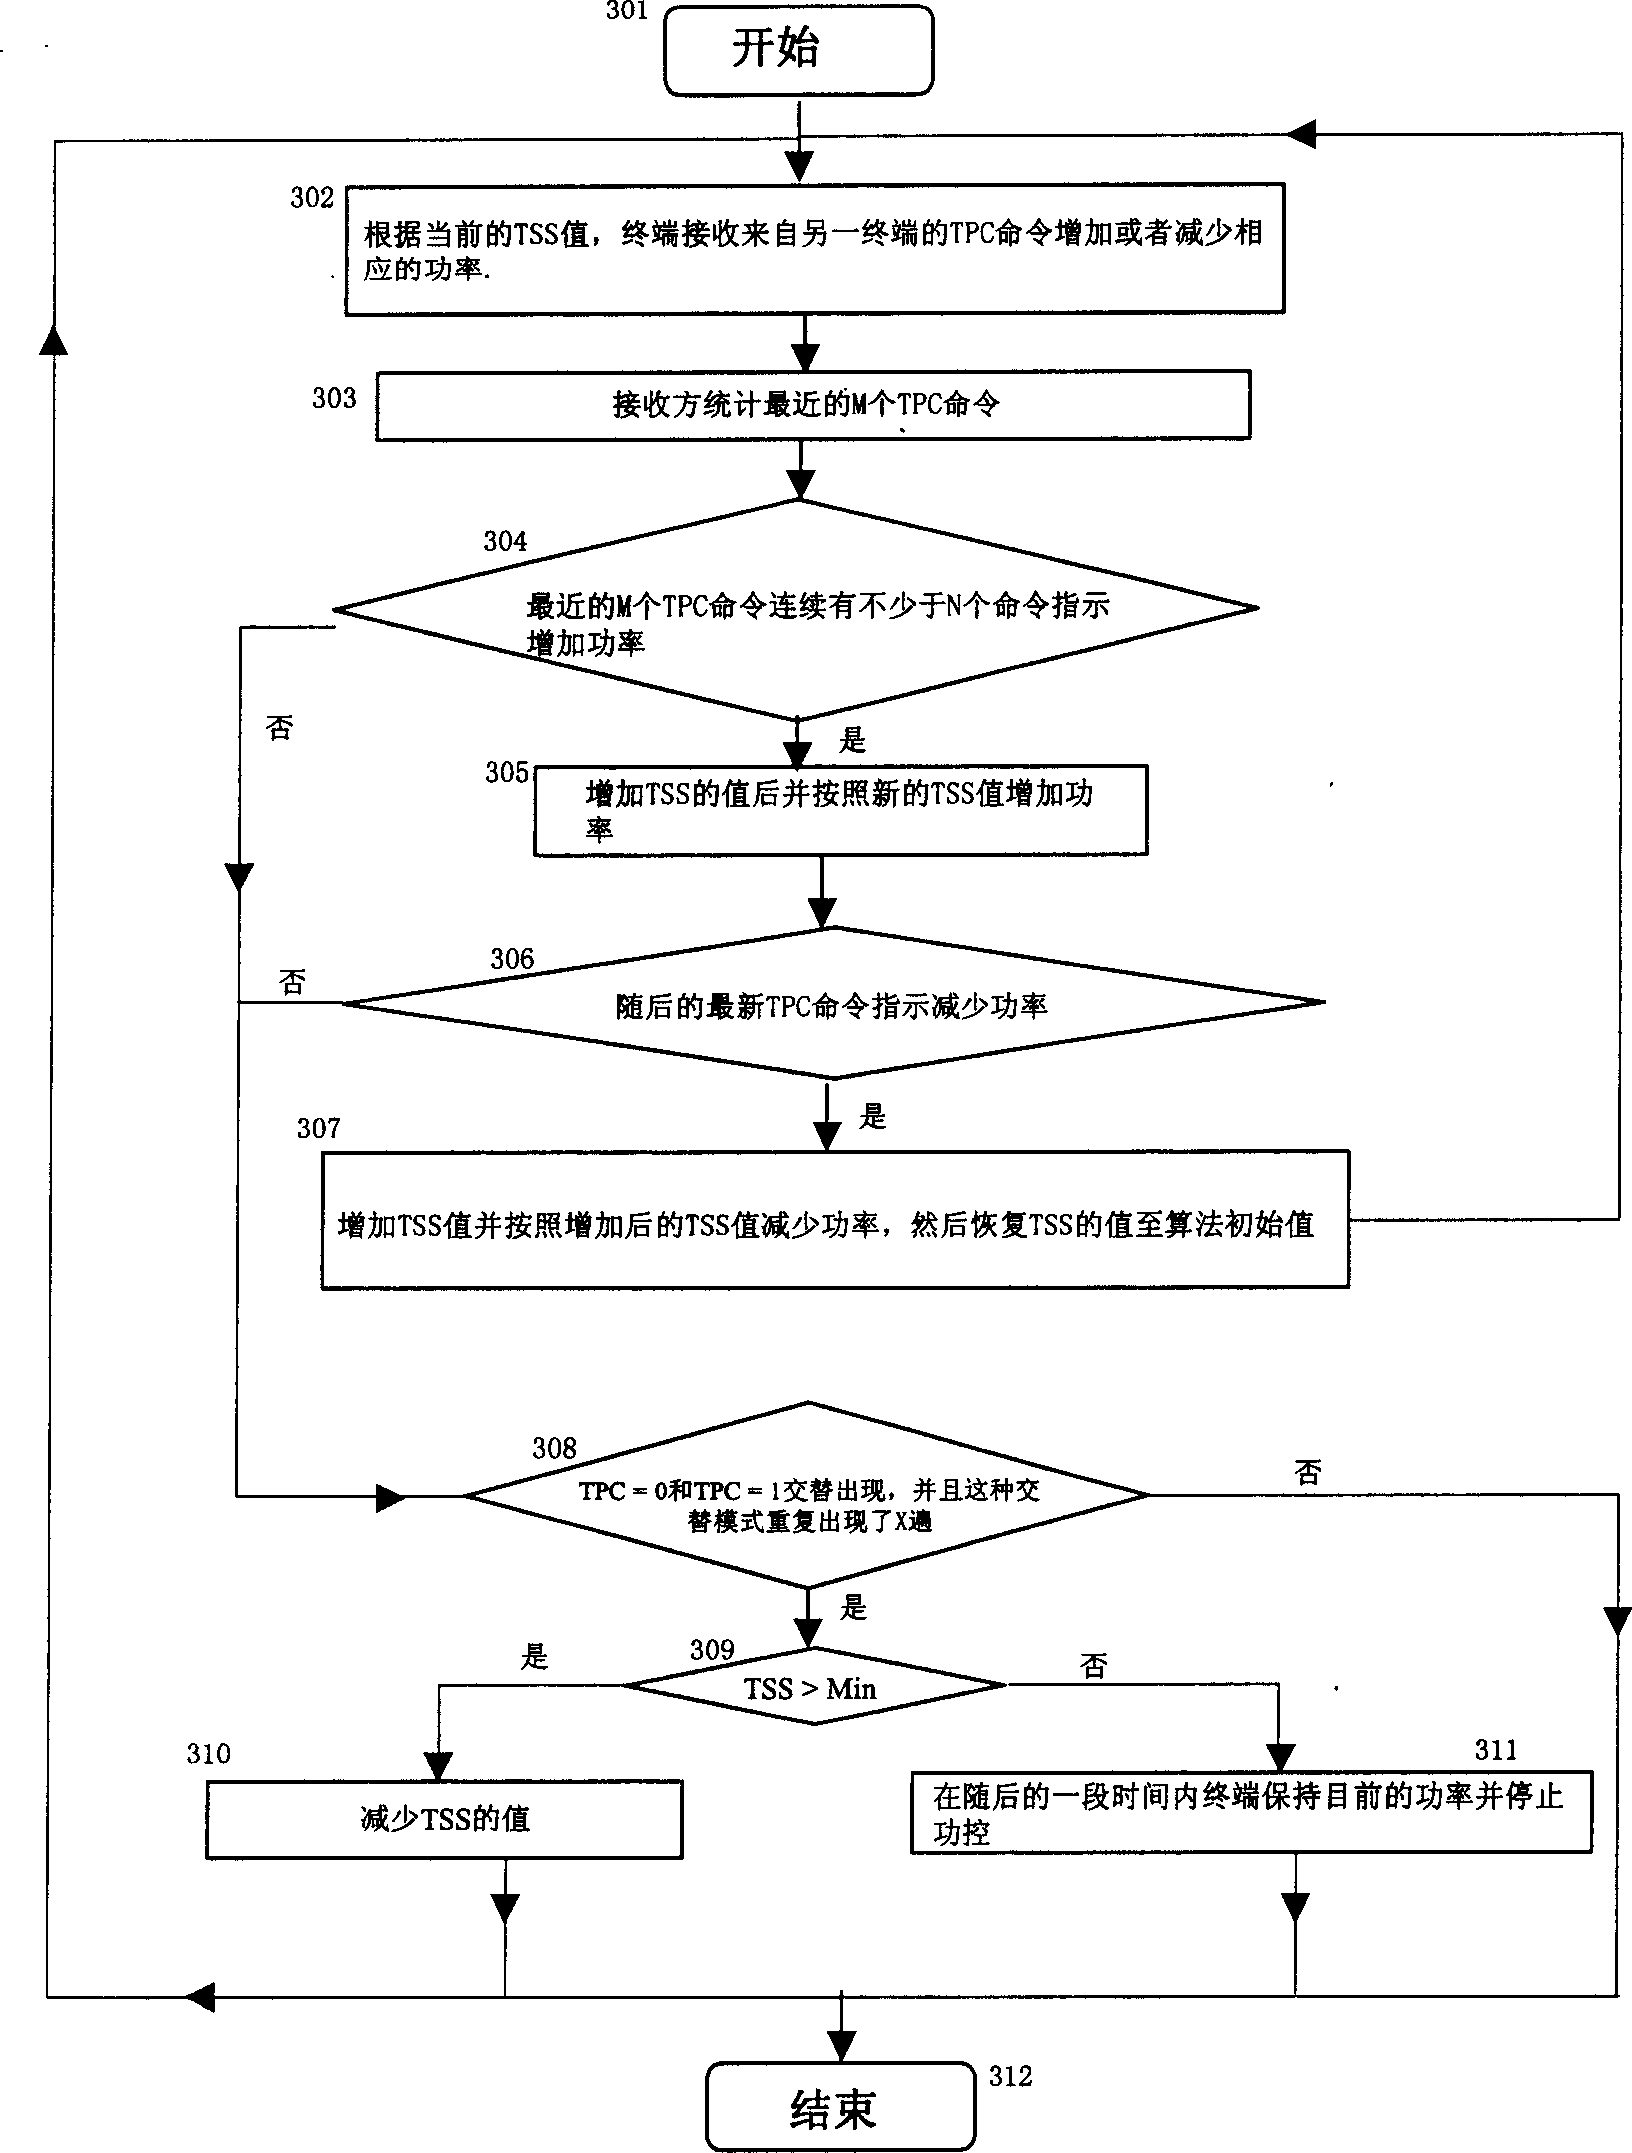 Power control method of end-to-end direct communication of NB TDD CDMA mobile communication system